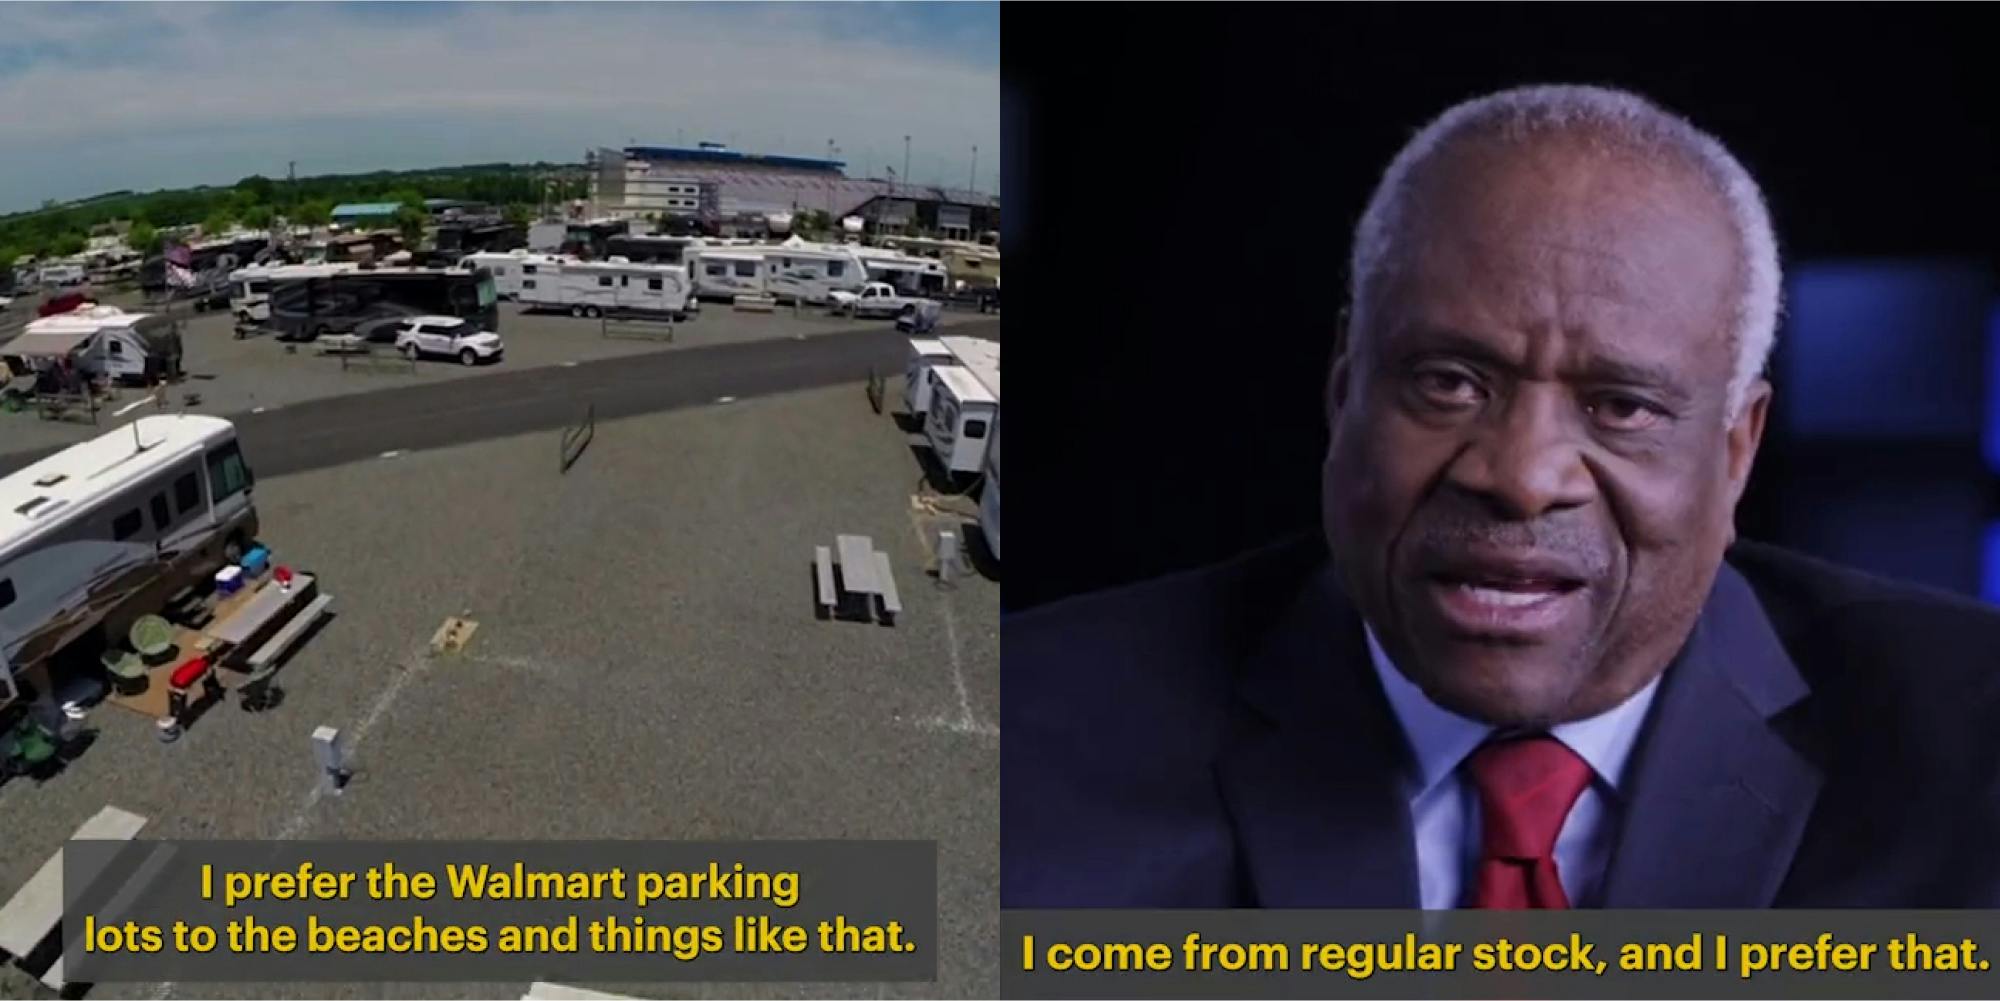 RV park with caption "I prefer the Walmart parking lots to the beaches and things like that." (l) Clarence Thomas speaking in front of black background with caption "I come from regular stock, and I prefer that." (r)